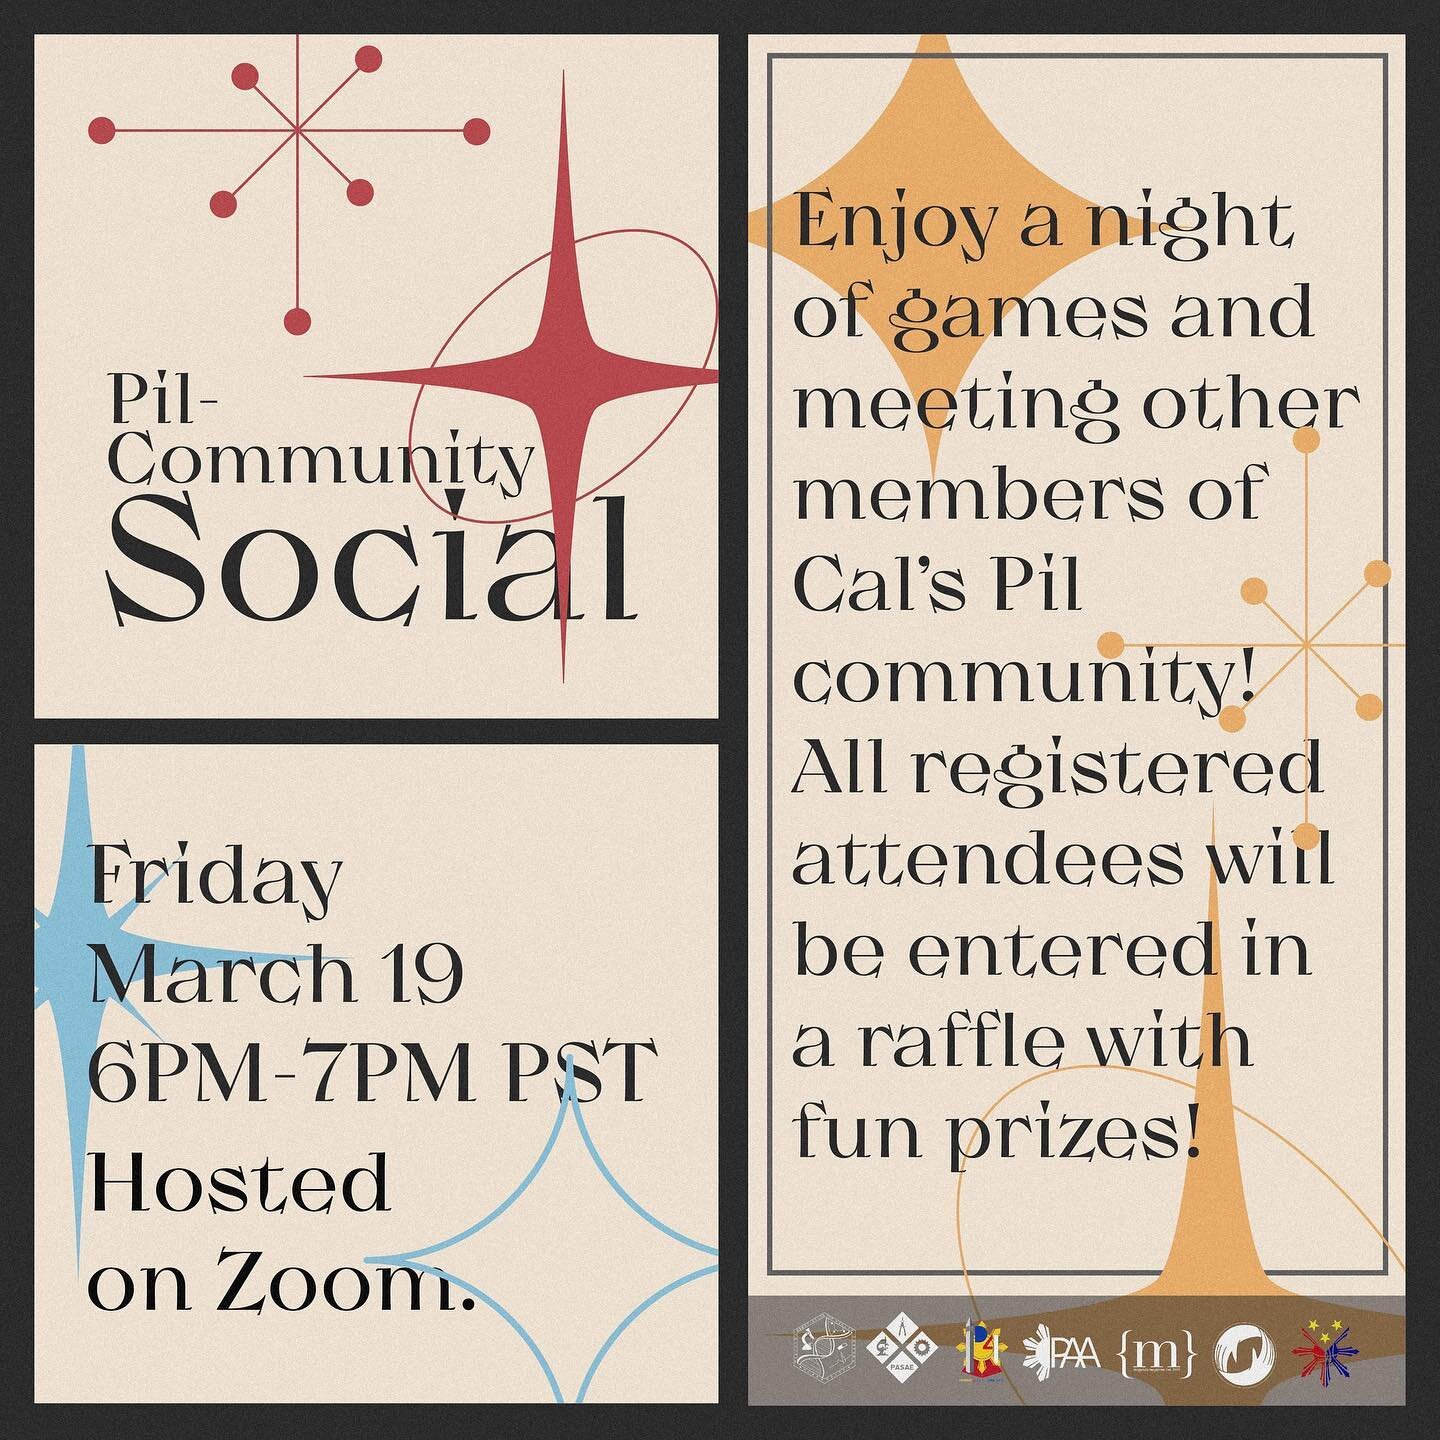 To our Cal community!!! Come join us this Friday 3/19 at 6-7PM PST via Zoom for our Pil Community Social!!!! All attendees get a $10 food gift card of their choice as well as entered into a raffle for a chance to win some exciting prizes! RSVP link l